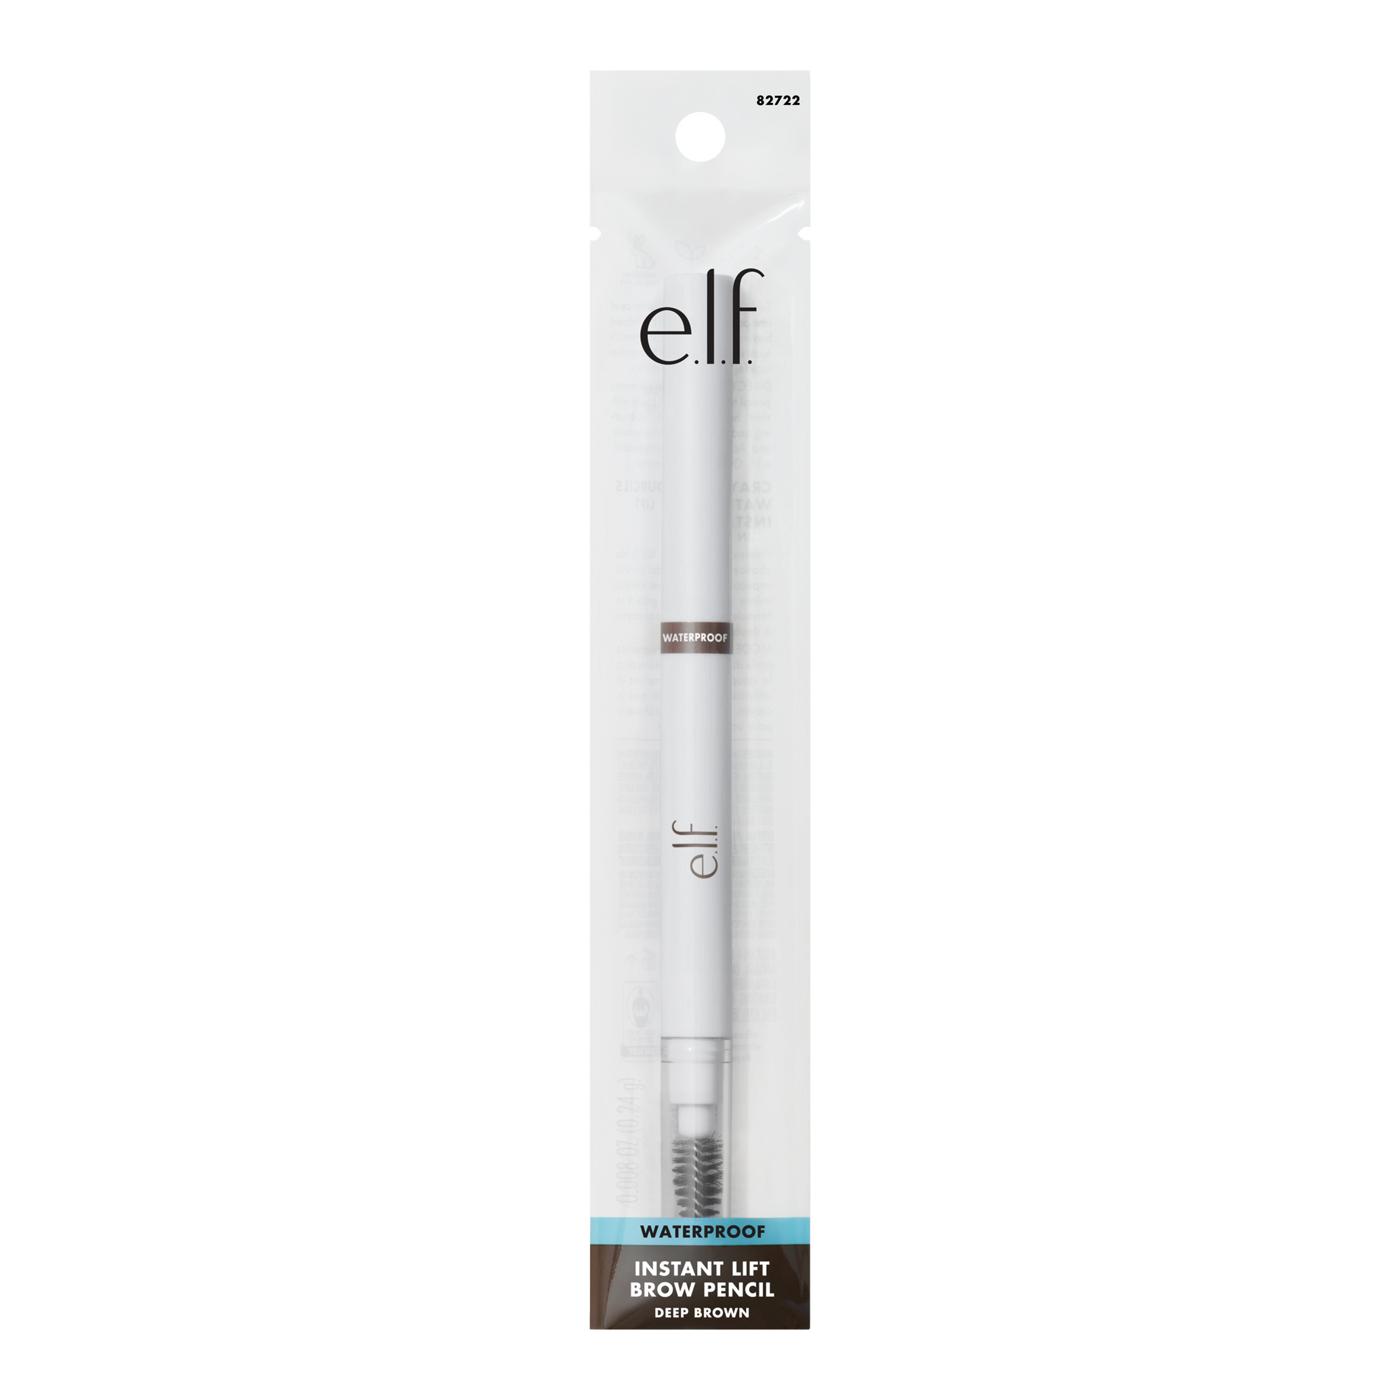 e.l.f. Instant Lift Brow Pencil Waterproof  - Brown ; image 1 of 2